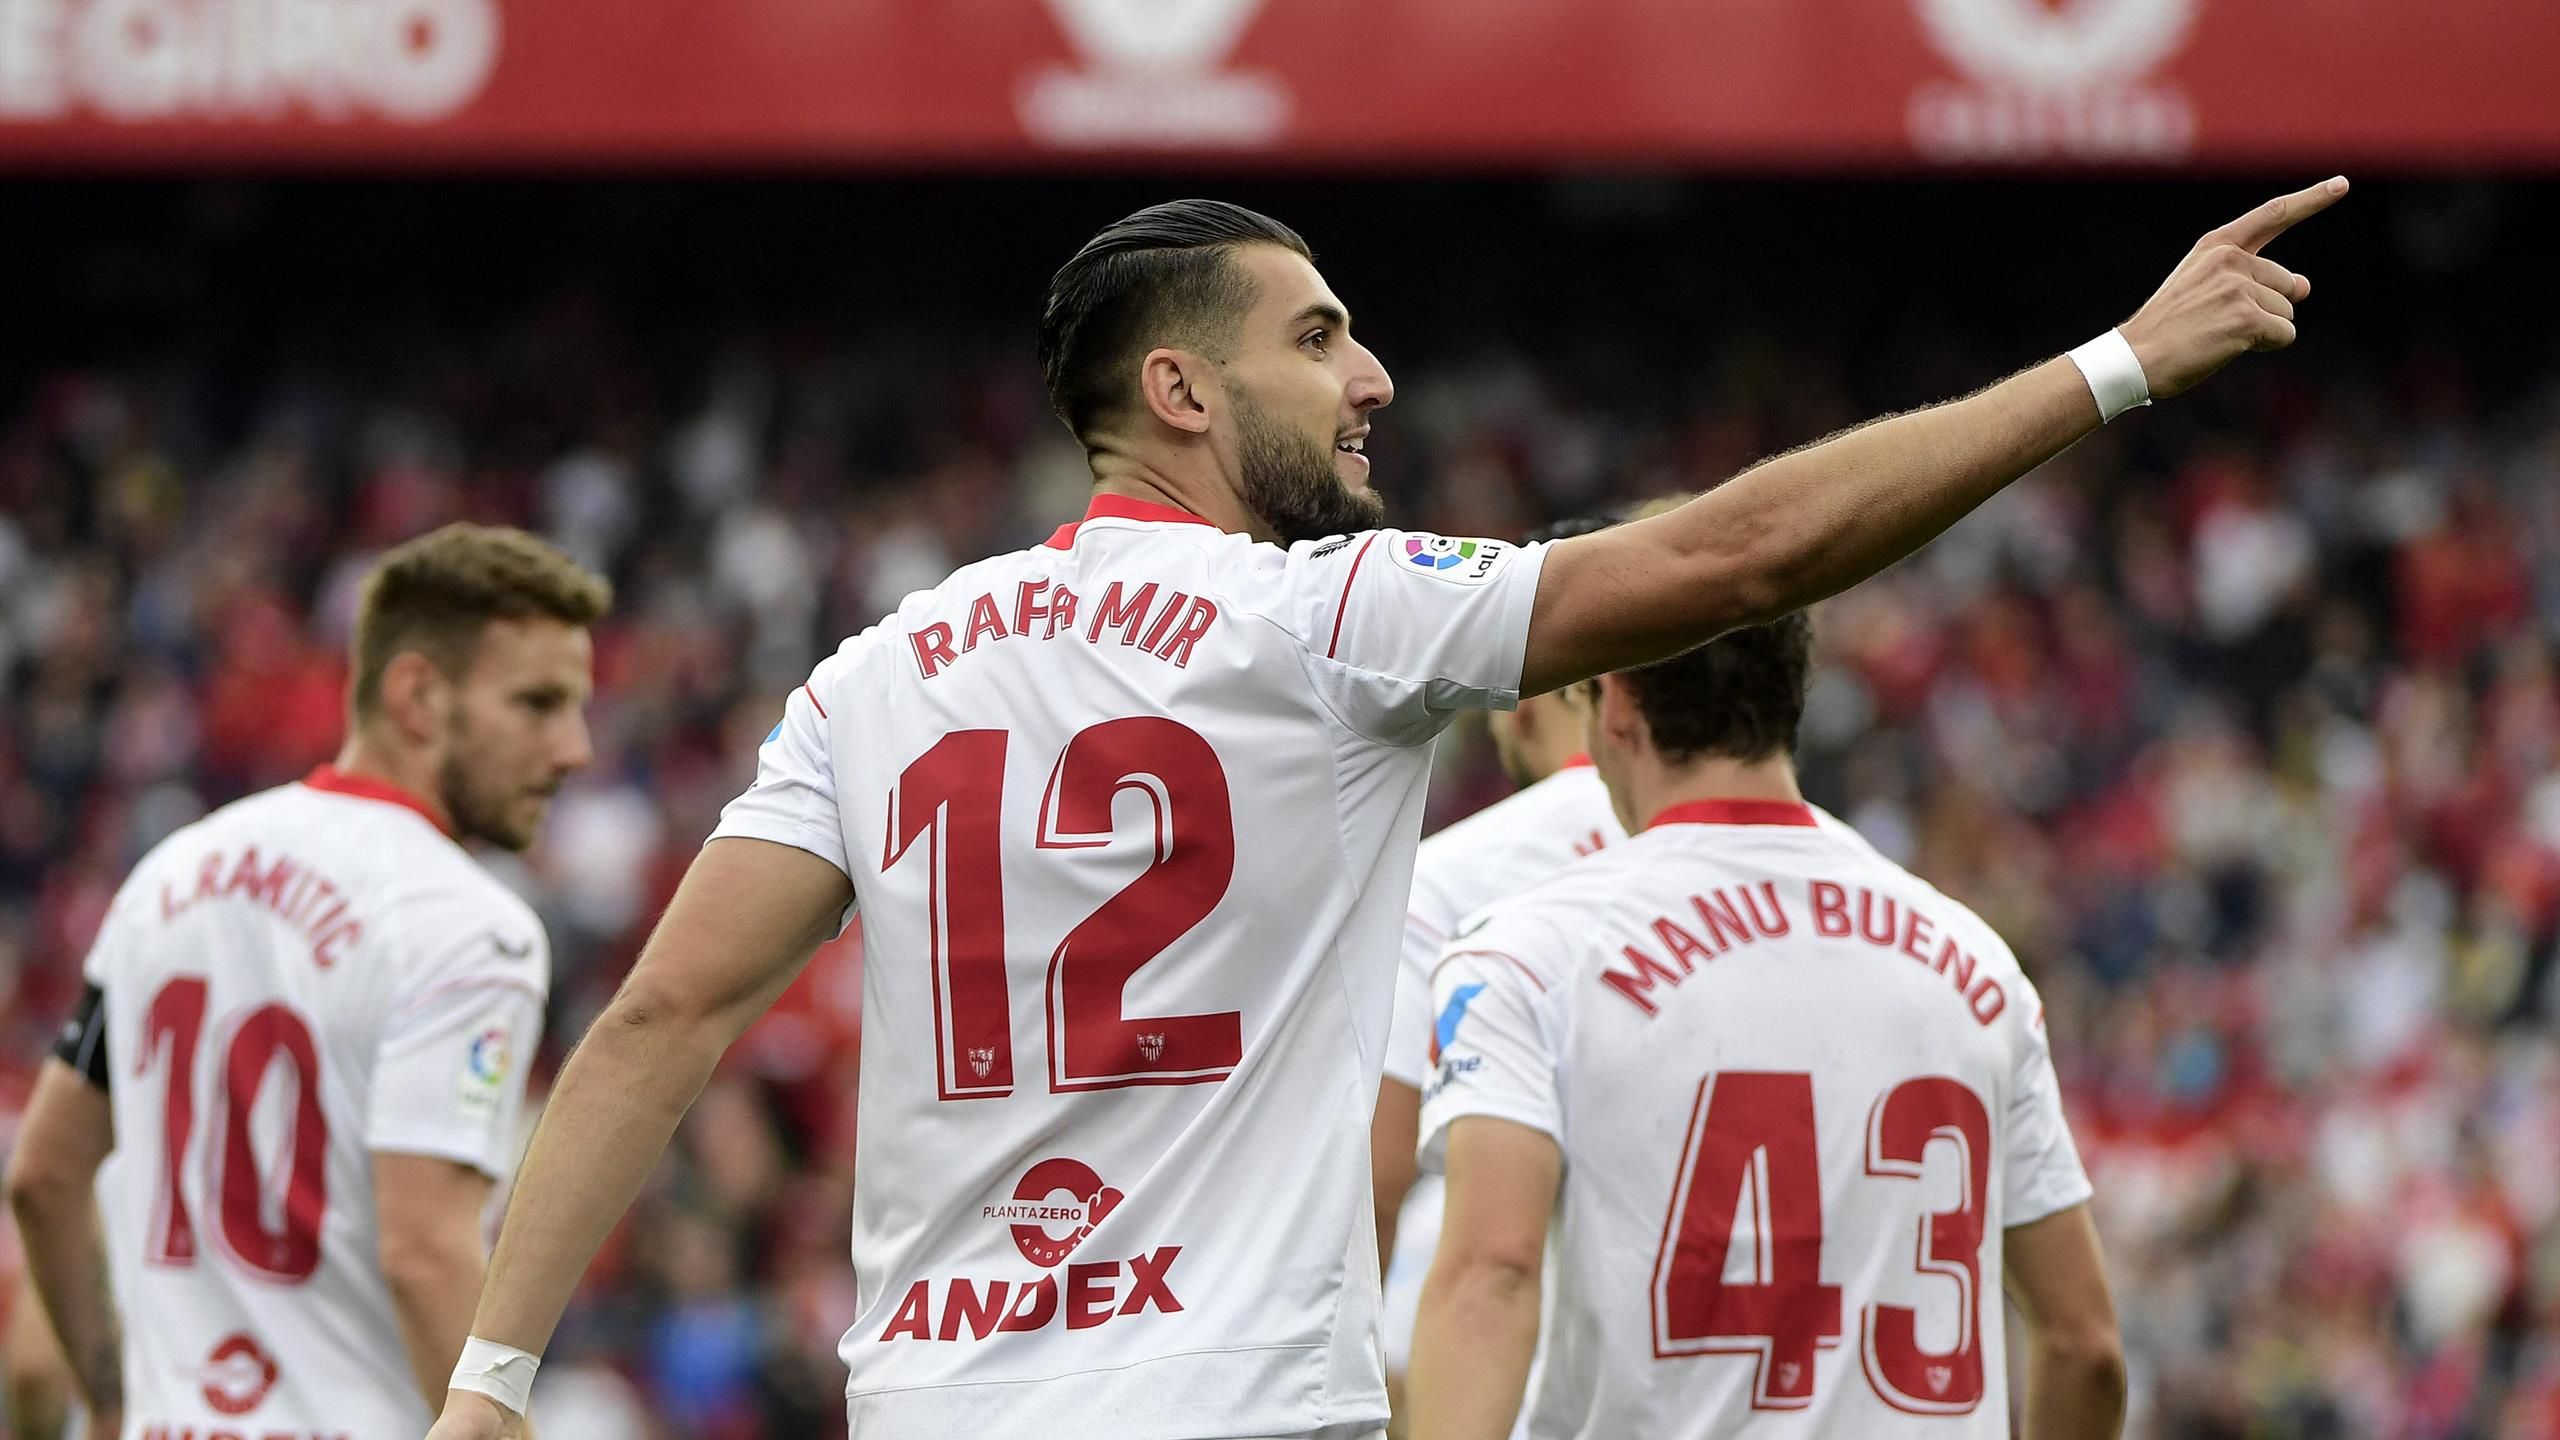 Sevilla v Roma How to watch Europa League final, TV channel, live stream details, kick-off time